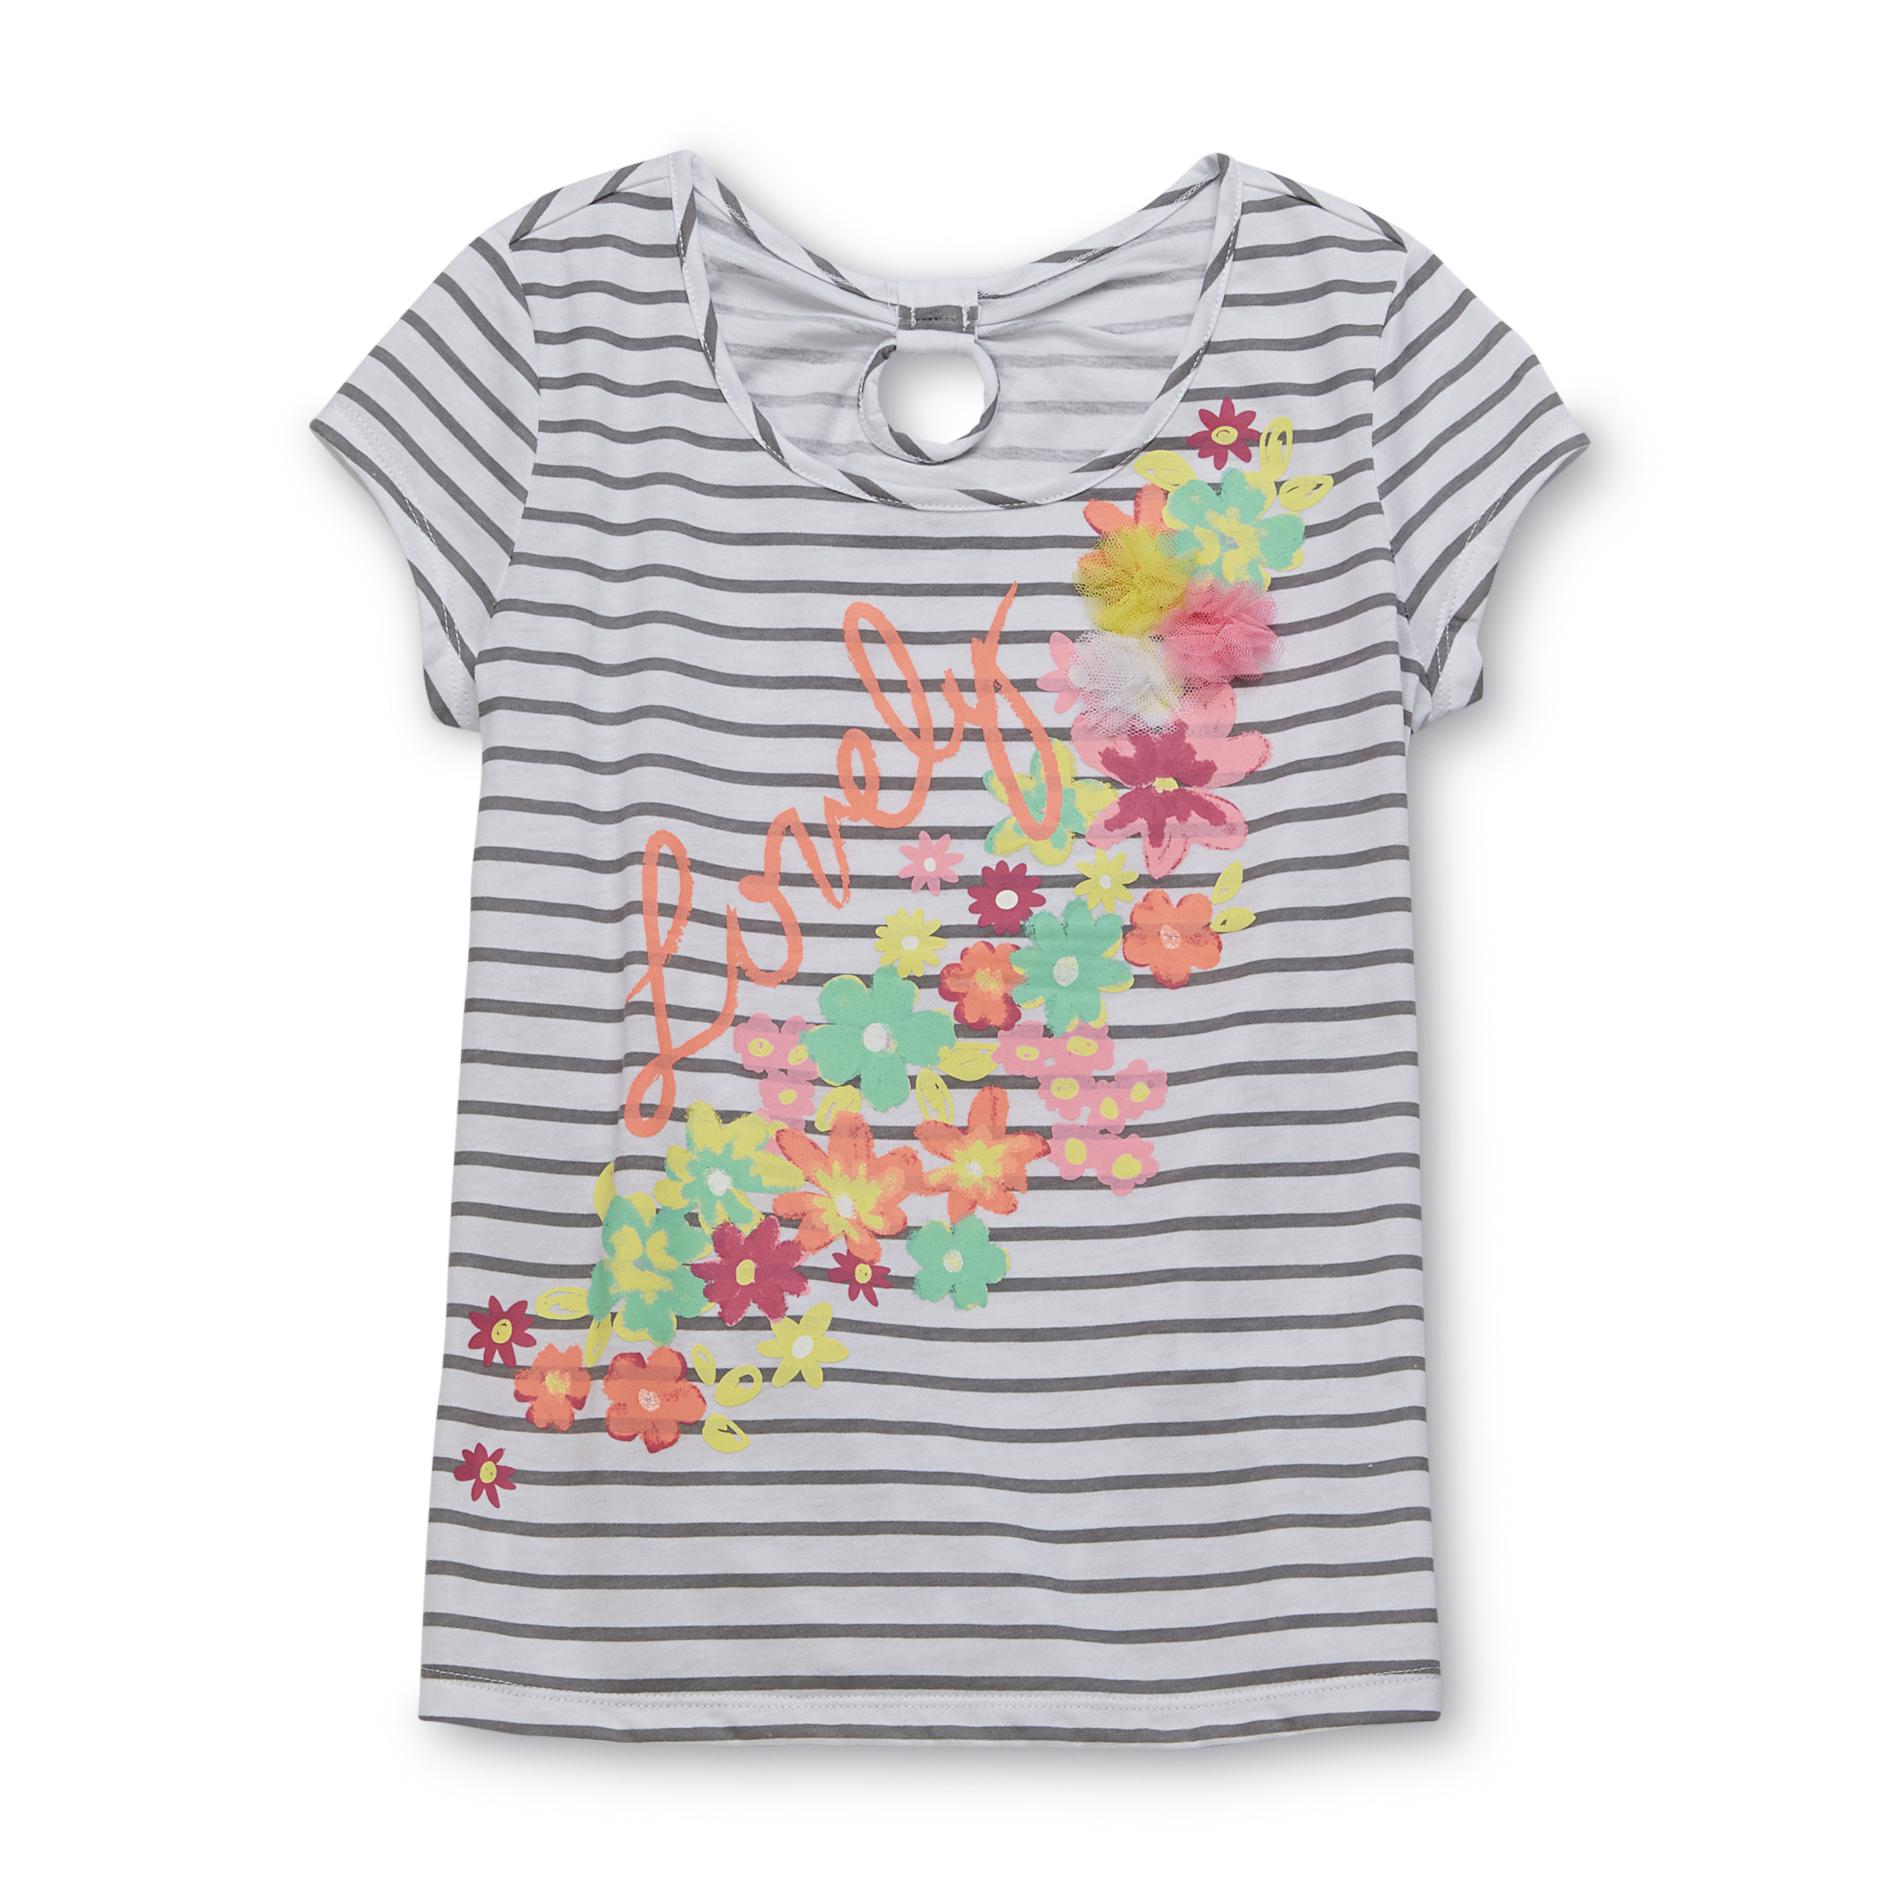 Basic Editions Girl's Keyhole-Back Top - Striped & Floral